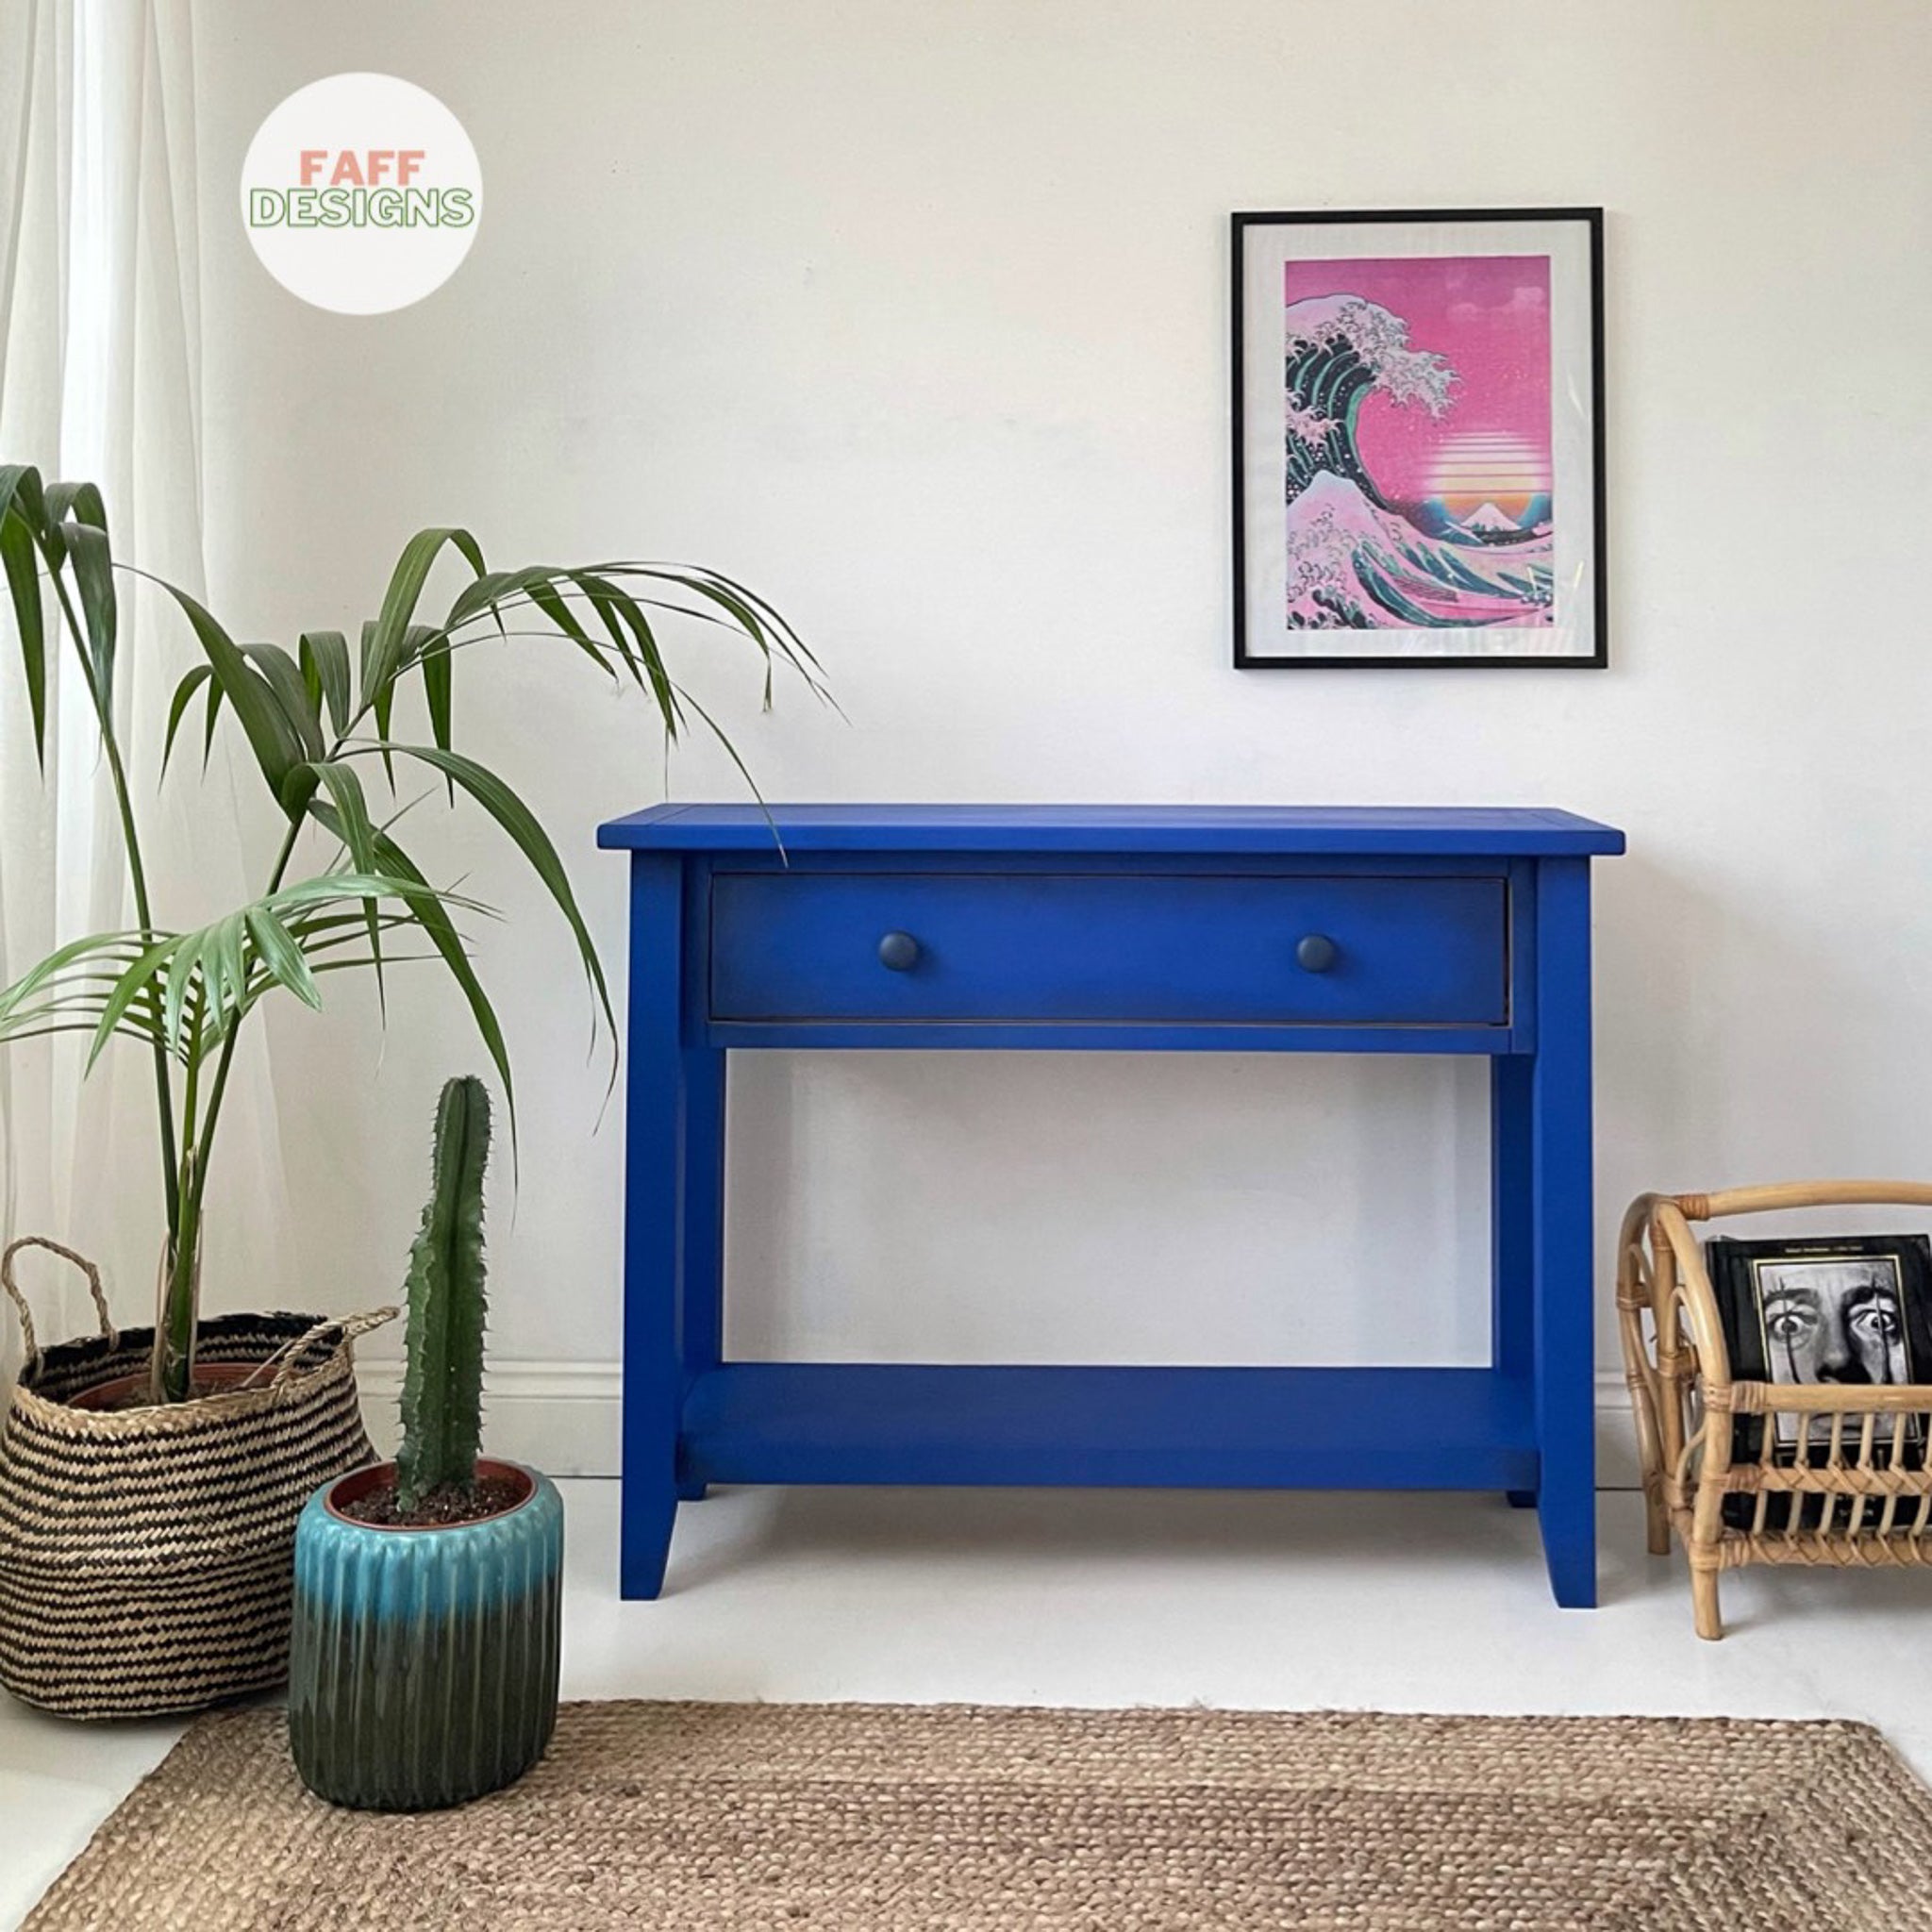 A console table refurbished by Faff Designs is painted with Dixie Belle's Cobalt Blue chalk mineral paint.